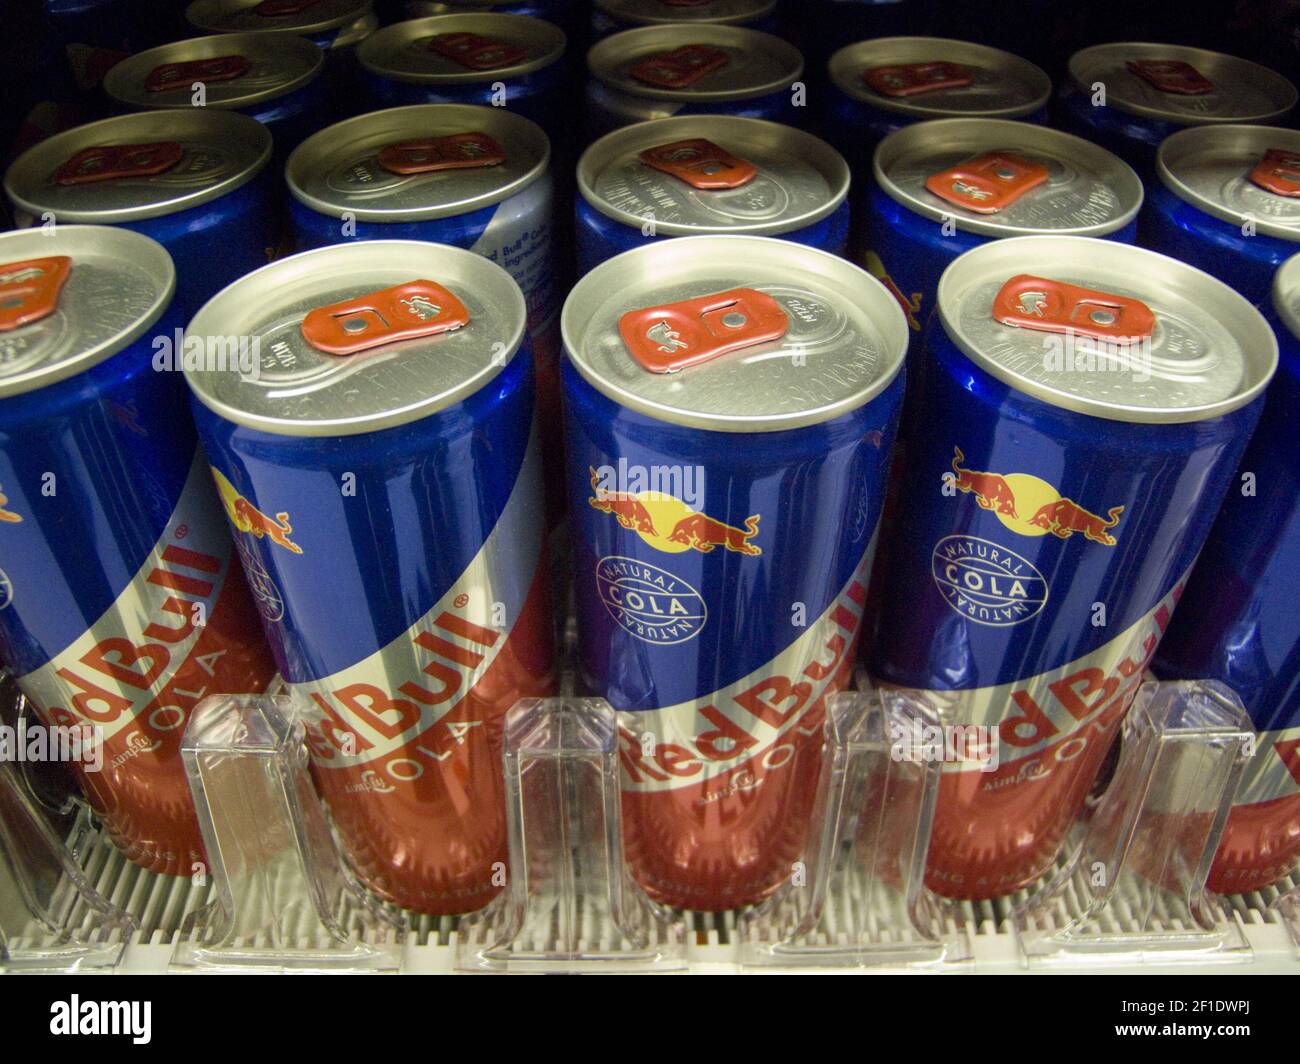 Red Bull Cola energy drink on a supermarket shelf on Friday